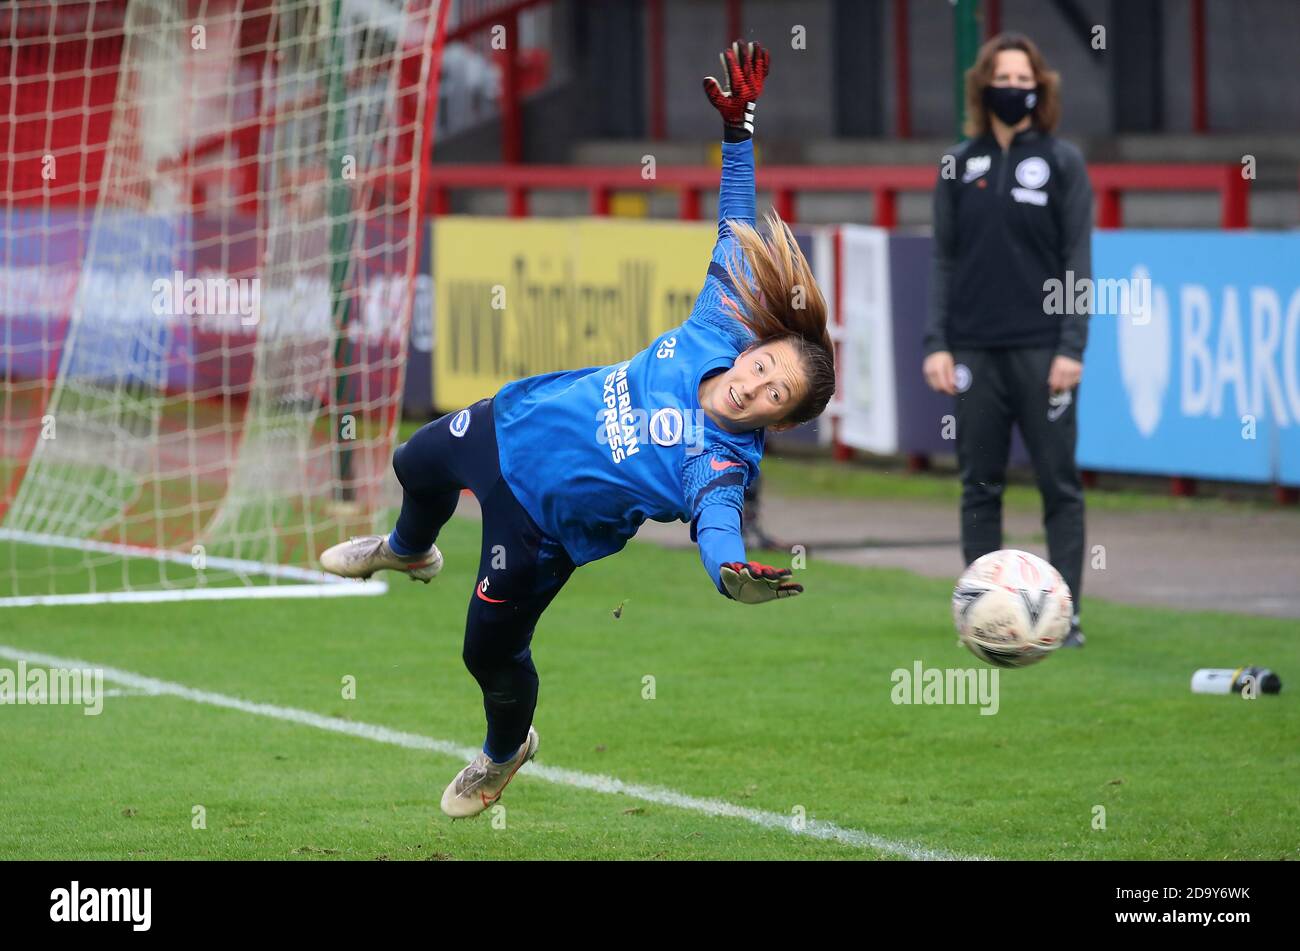 Brighton and Hove Albion goalkeeper Cecilie Fiskerstrand warming up before the FA Women's Super League match at the People's Pension Stadium, Crawley. Stock Photo